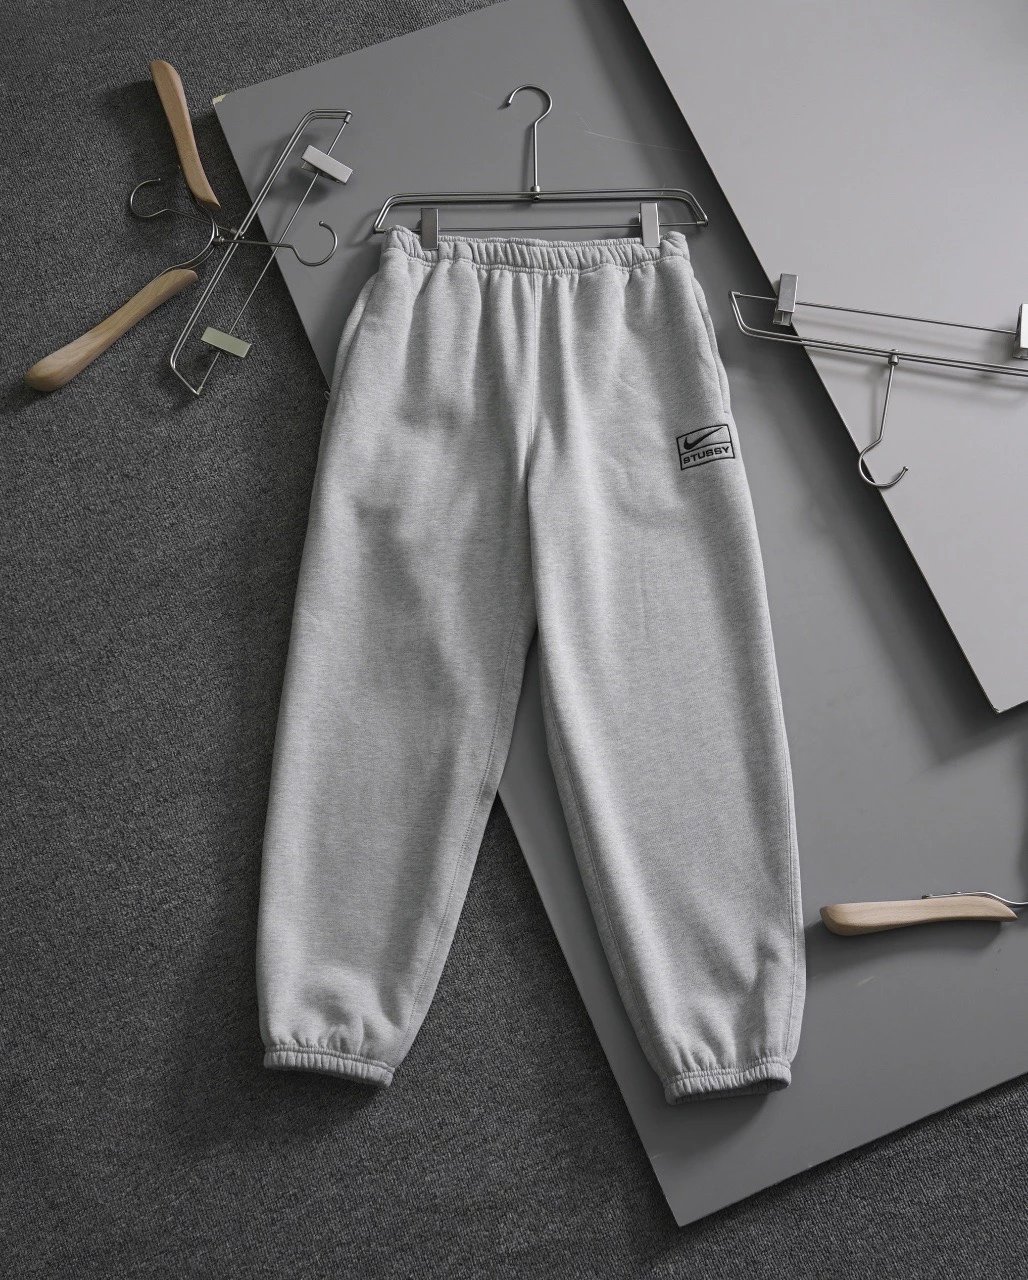 Item Thumbnail for Stussy co-branded pants, corset athleisure sweatpants, embroidered logo, Ouyang Nana, the same trend